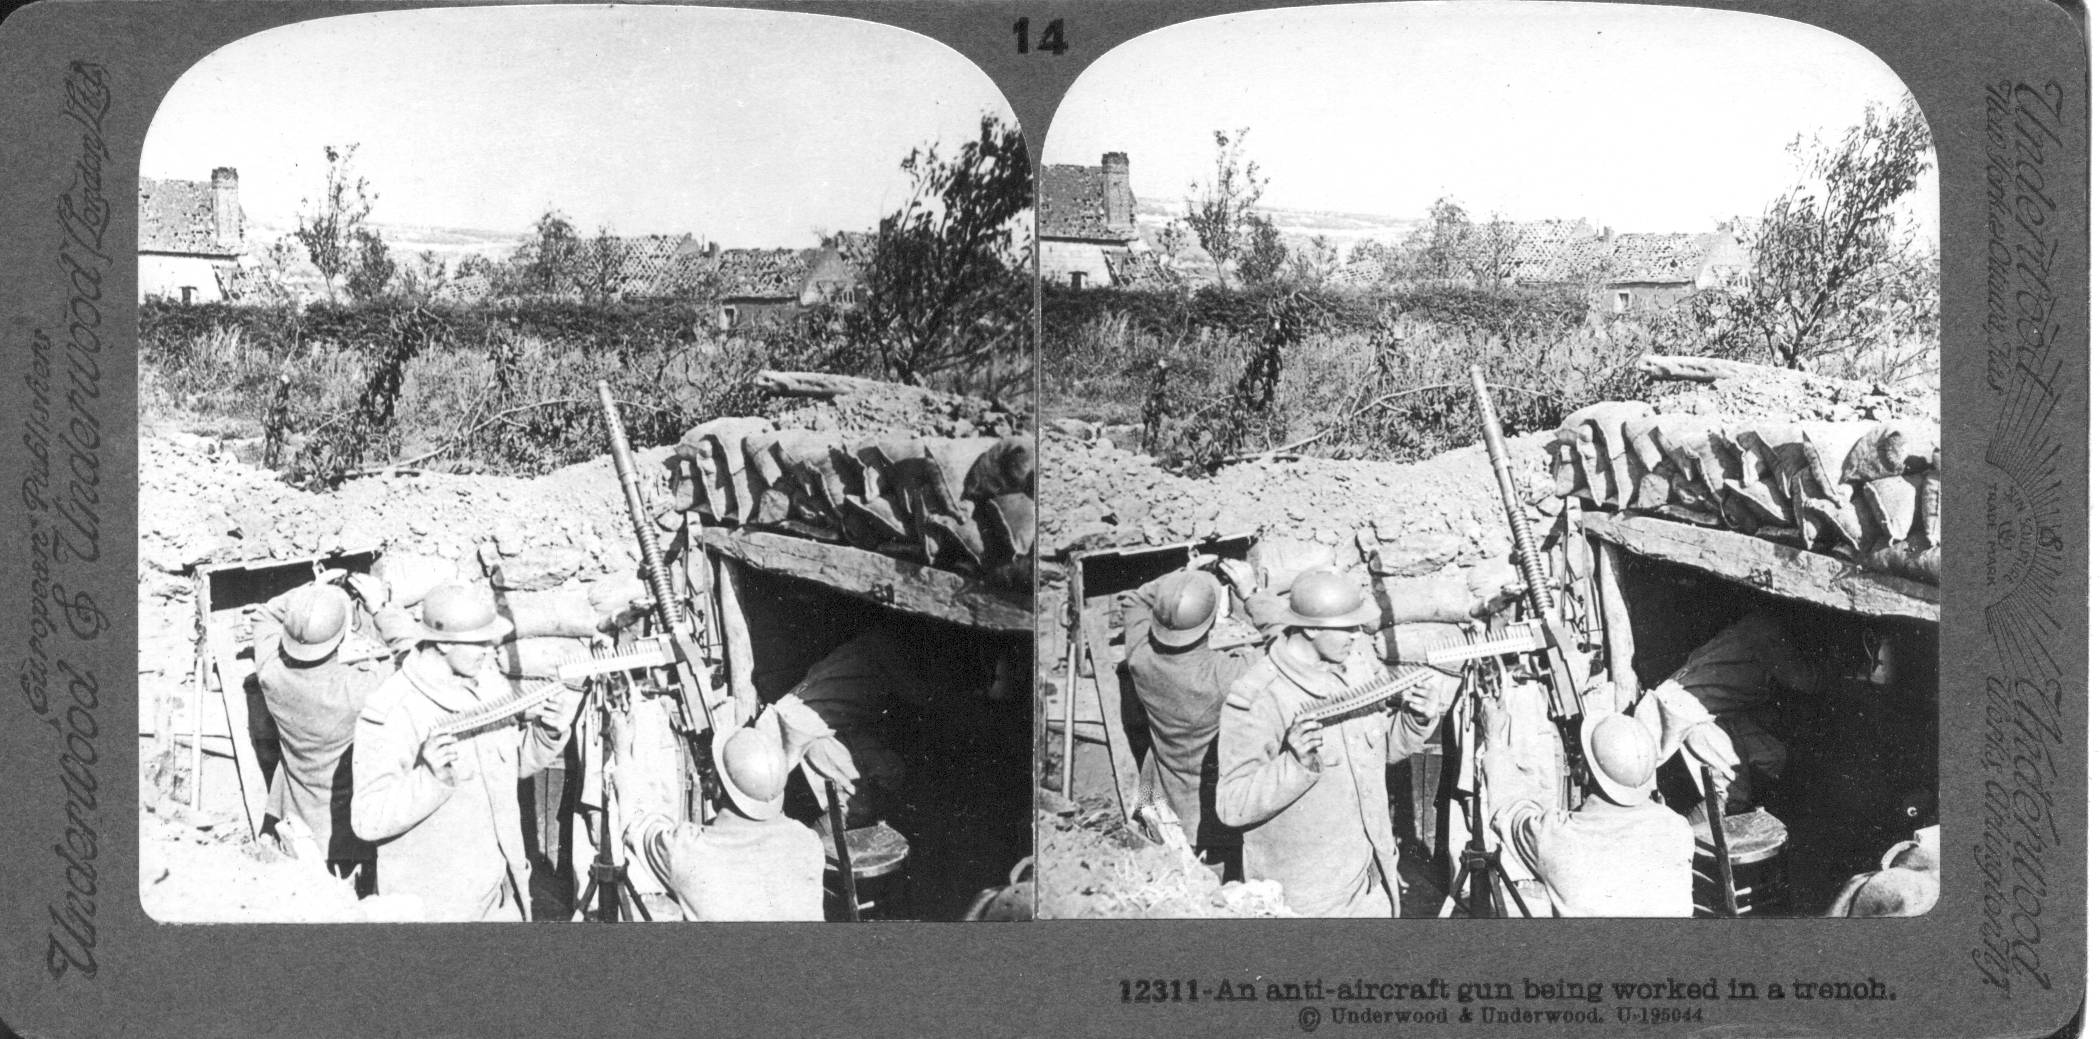 An anti-aircraft gun being worked in a trench